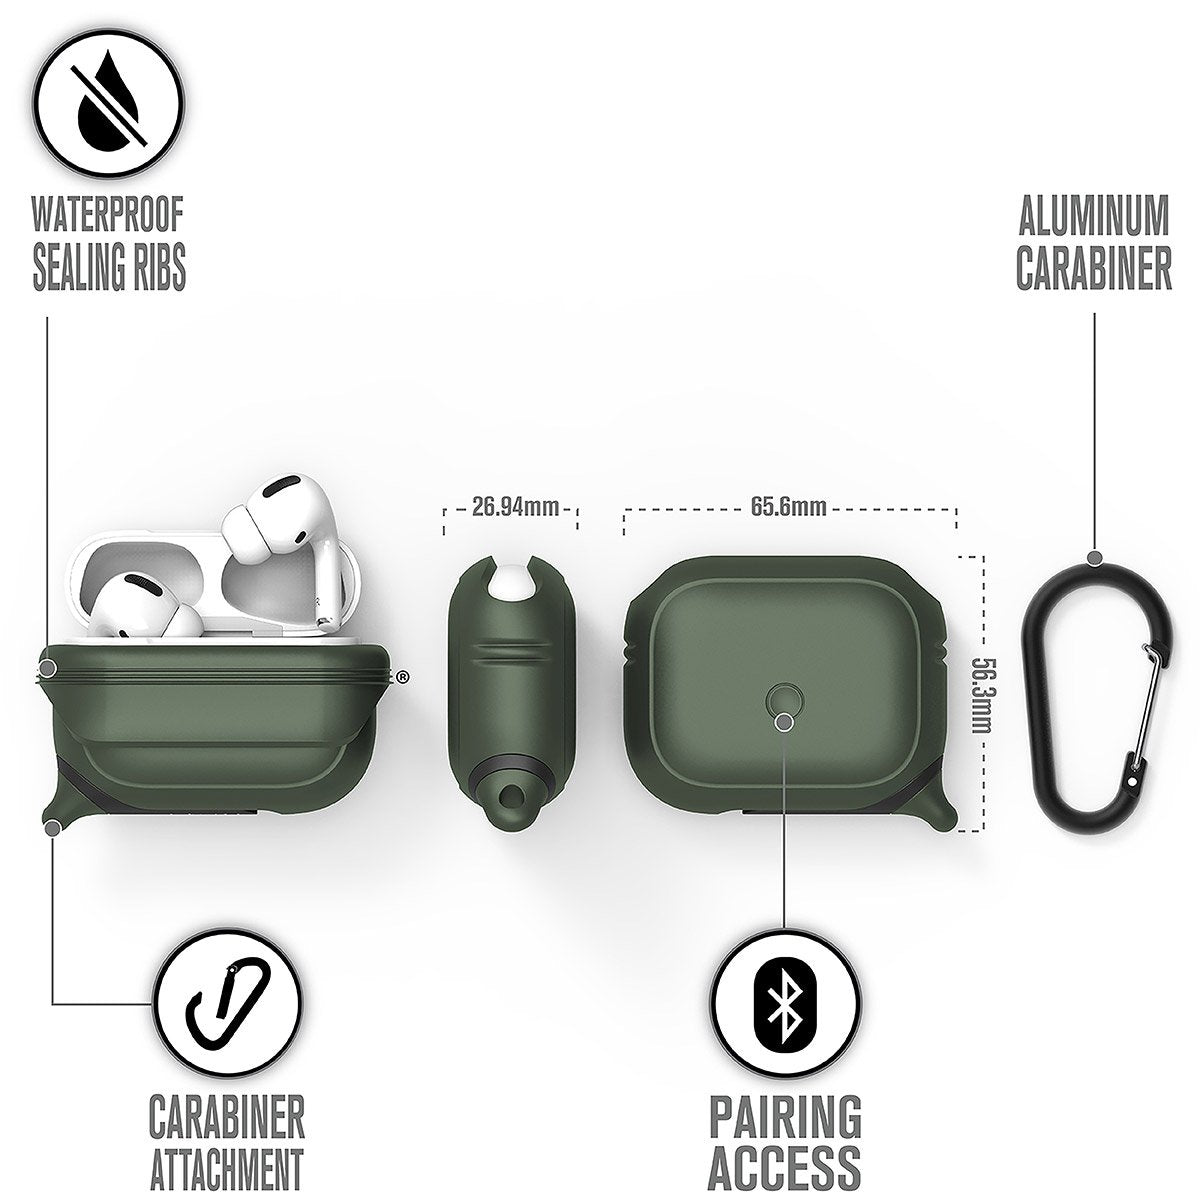 CATAPDPROGRN | catalyst airpods pro gen 2 1 waterproof case carabiner army green different views showing the sealing ribs carabiner attachment loop and pairing access text reads waterproof sealing ribs aluminum carabiner carabiner attachment pairing access